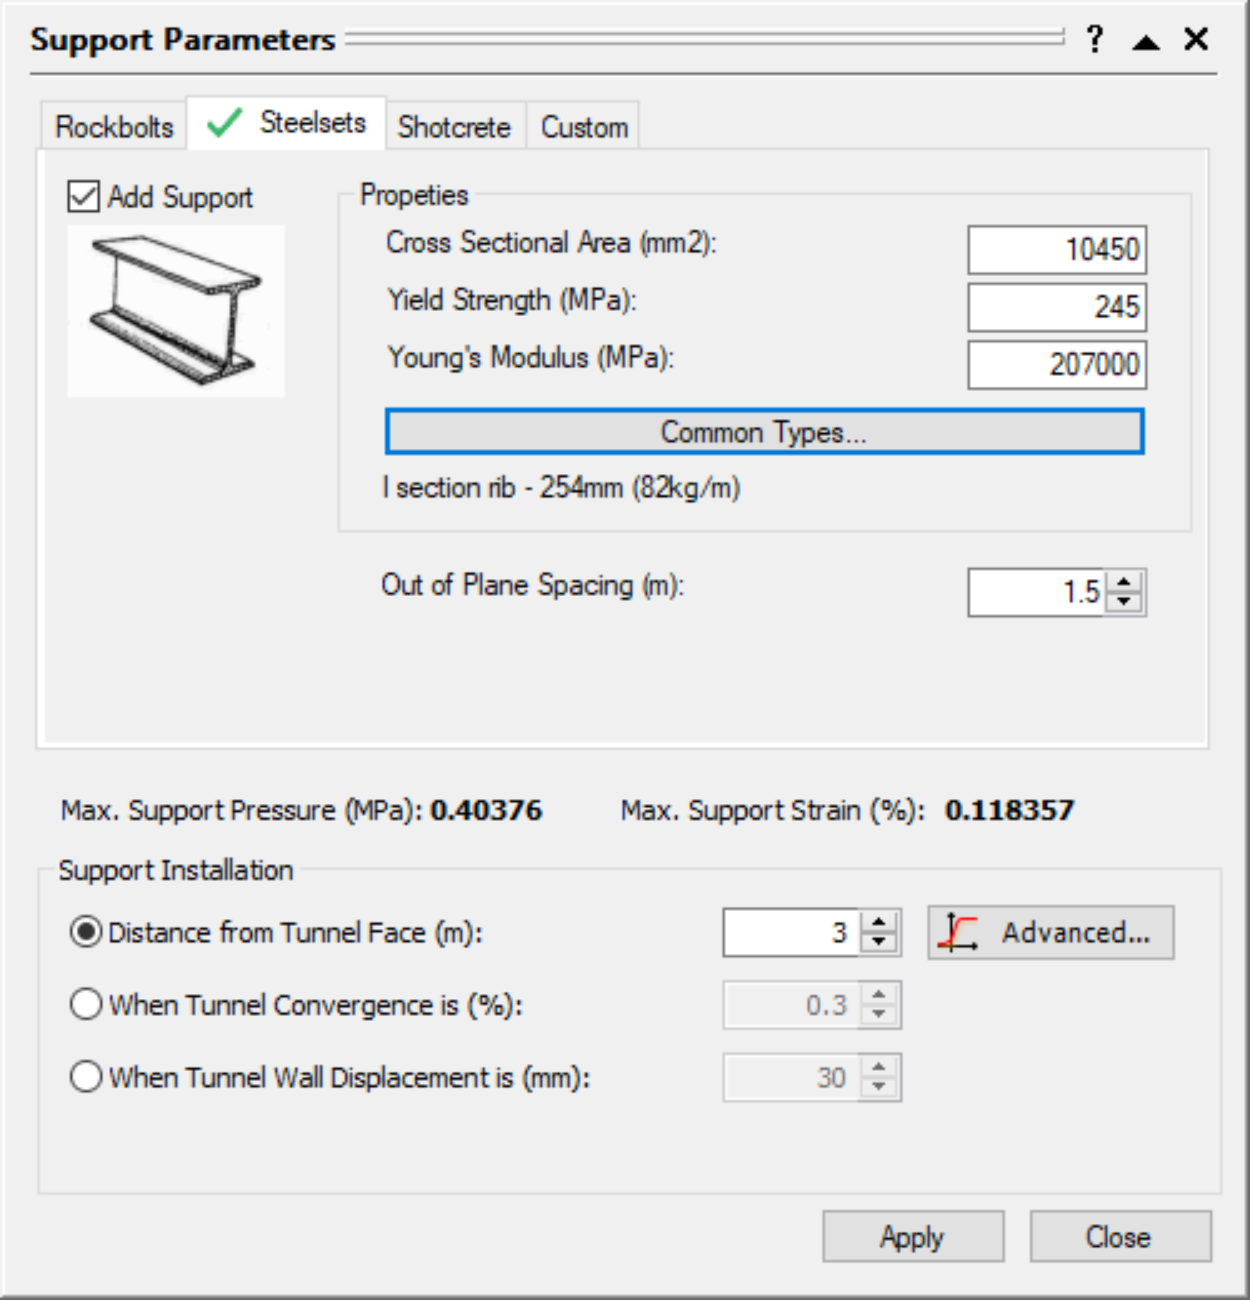 Support Parameters Dialog